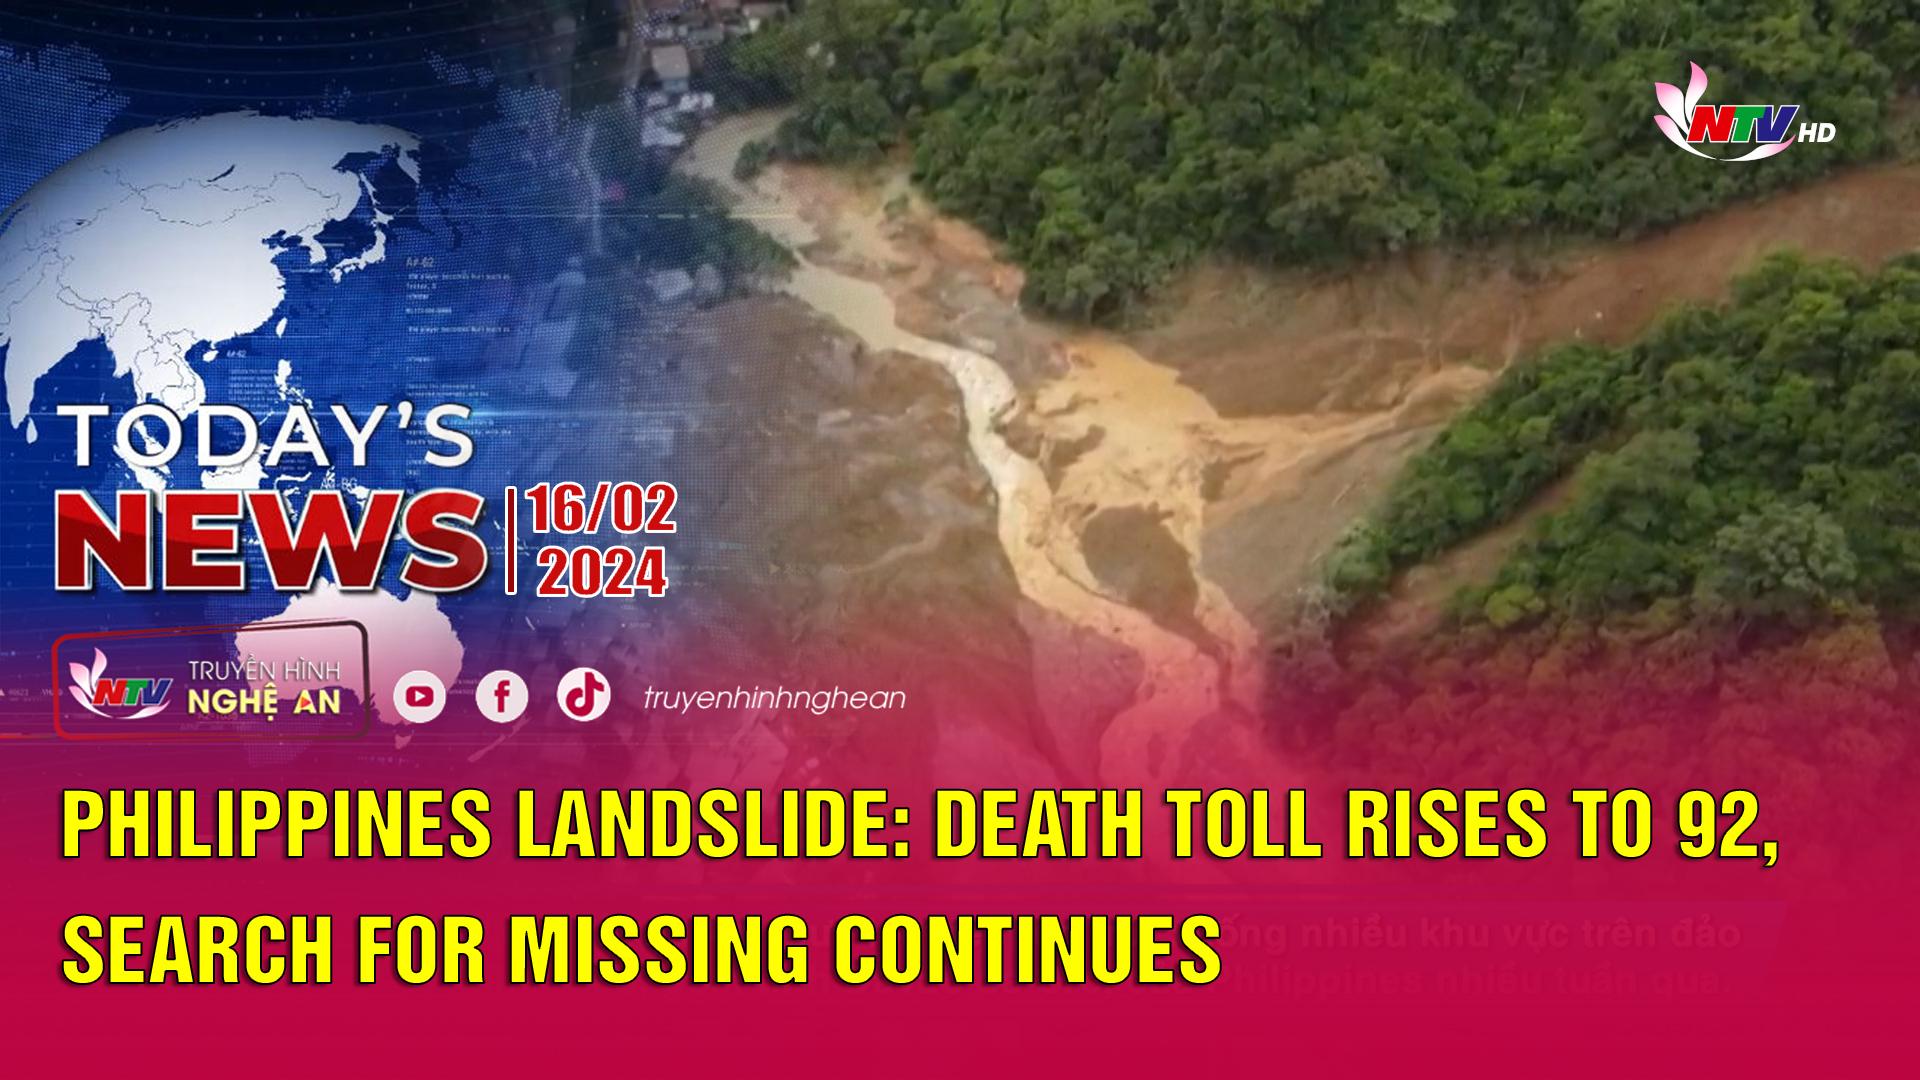 Today's News - 16/02/2024:  Philippines Landslide: Death Toll rises to 92, search for missing continues